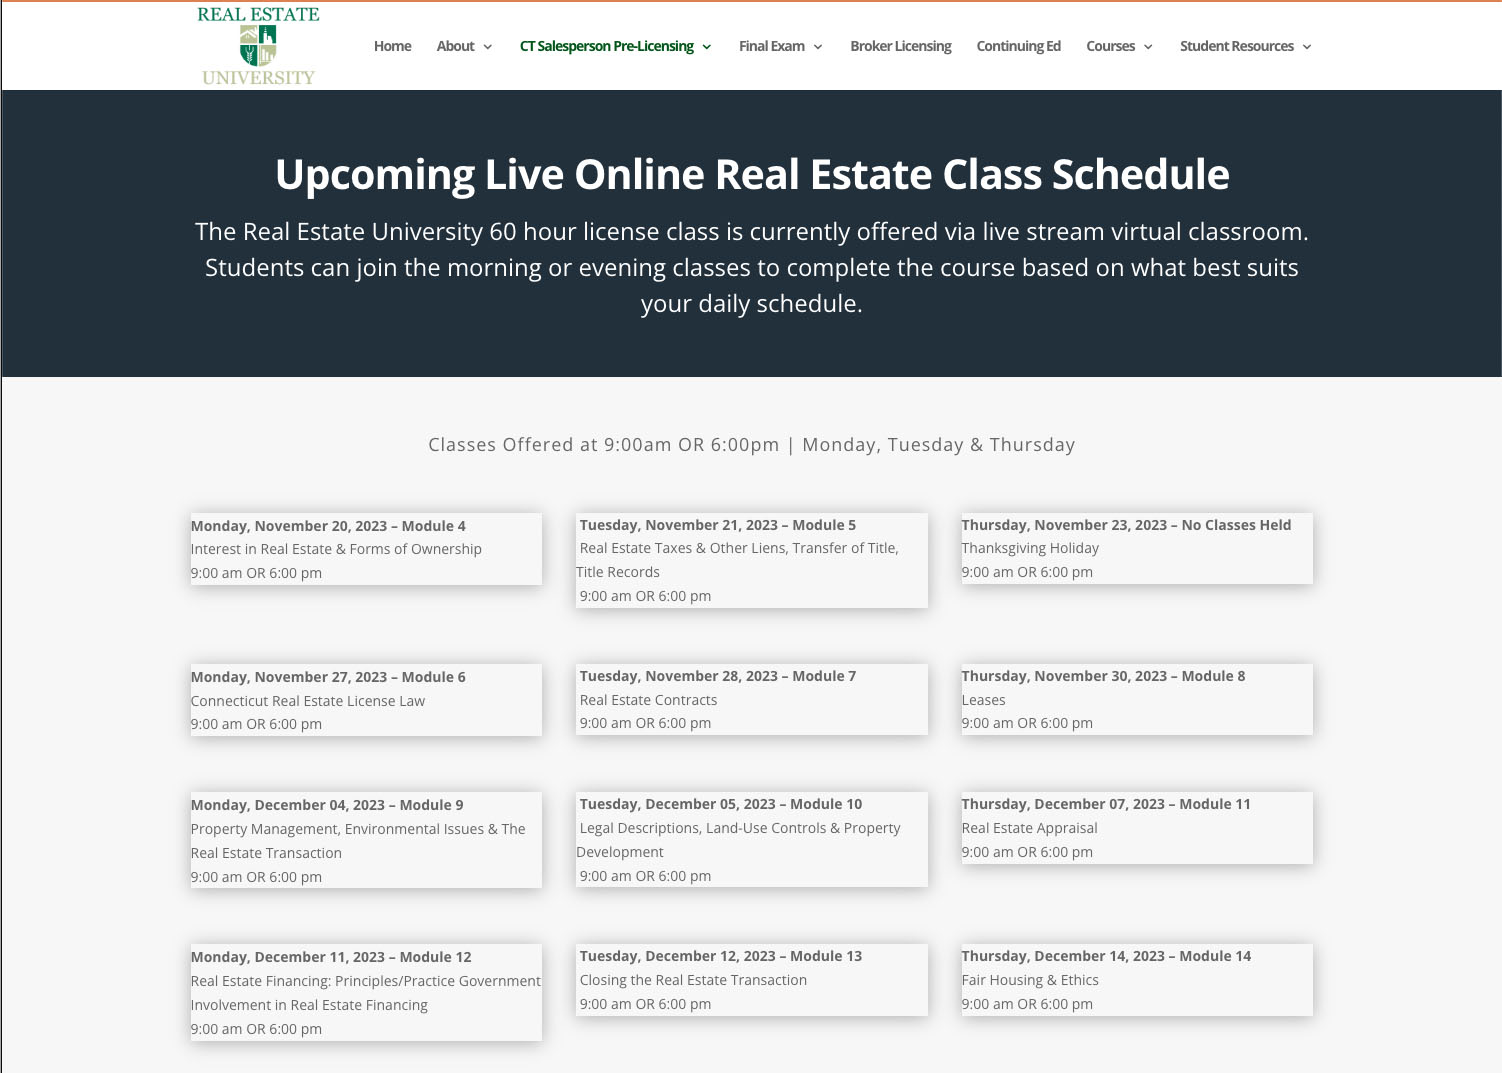 Upcoming live class schedules on the Real Estate University website.